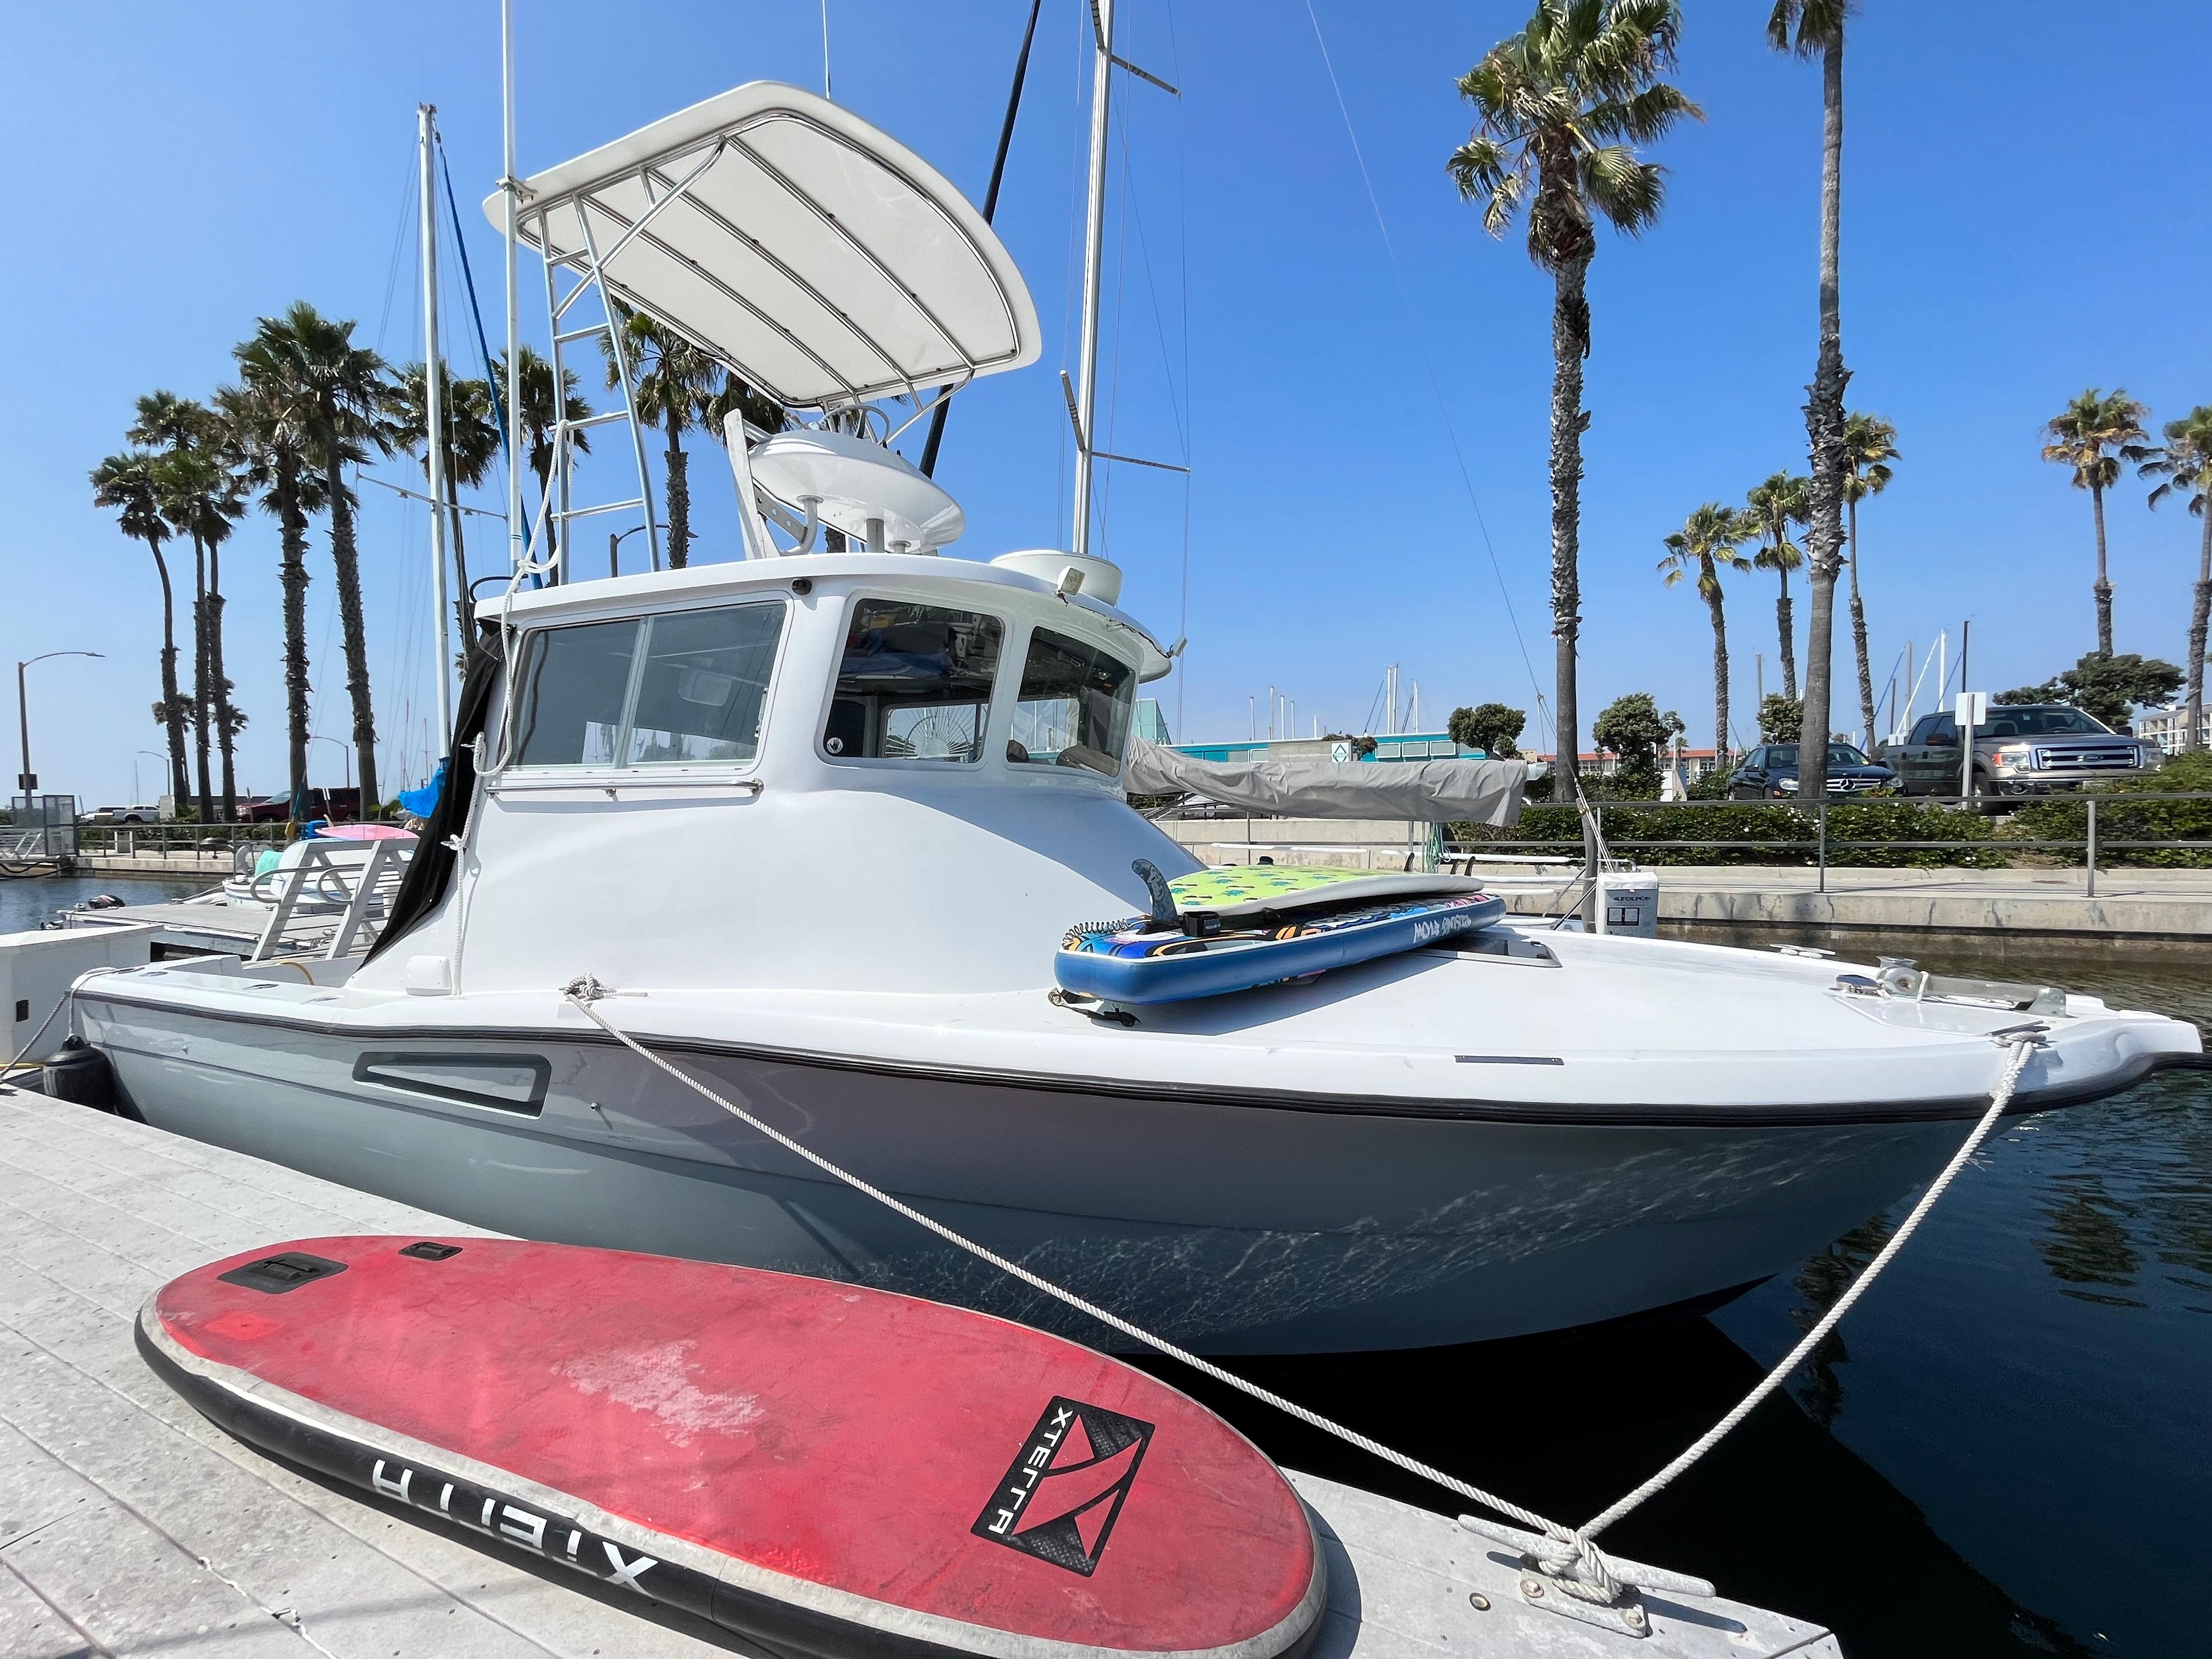 Explore Pursuit 300 Boats For Sale - Boat Trader